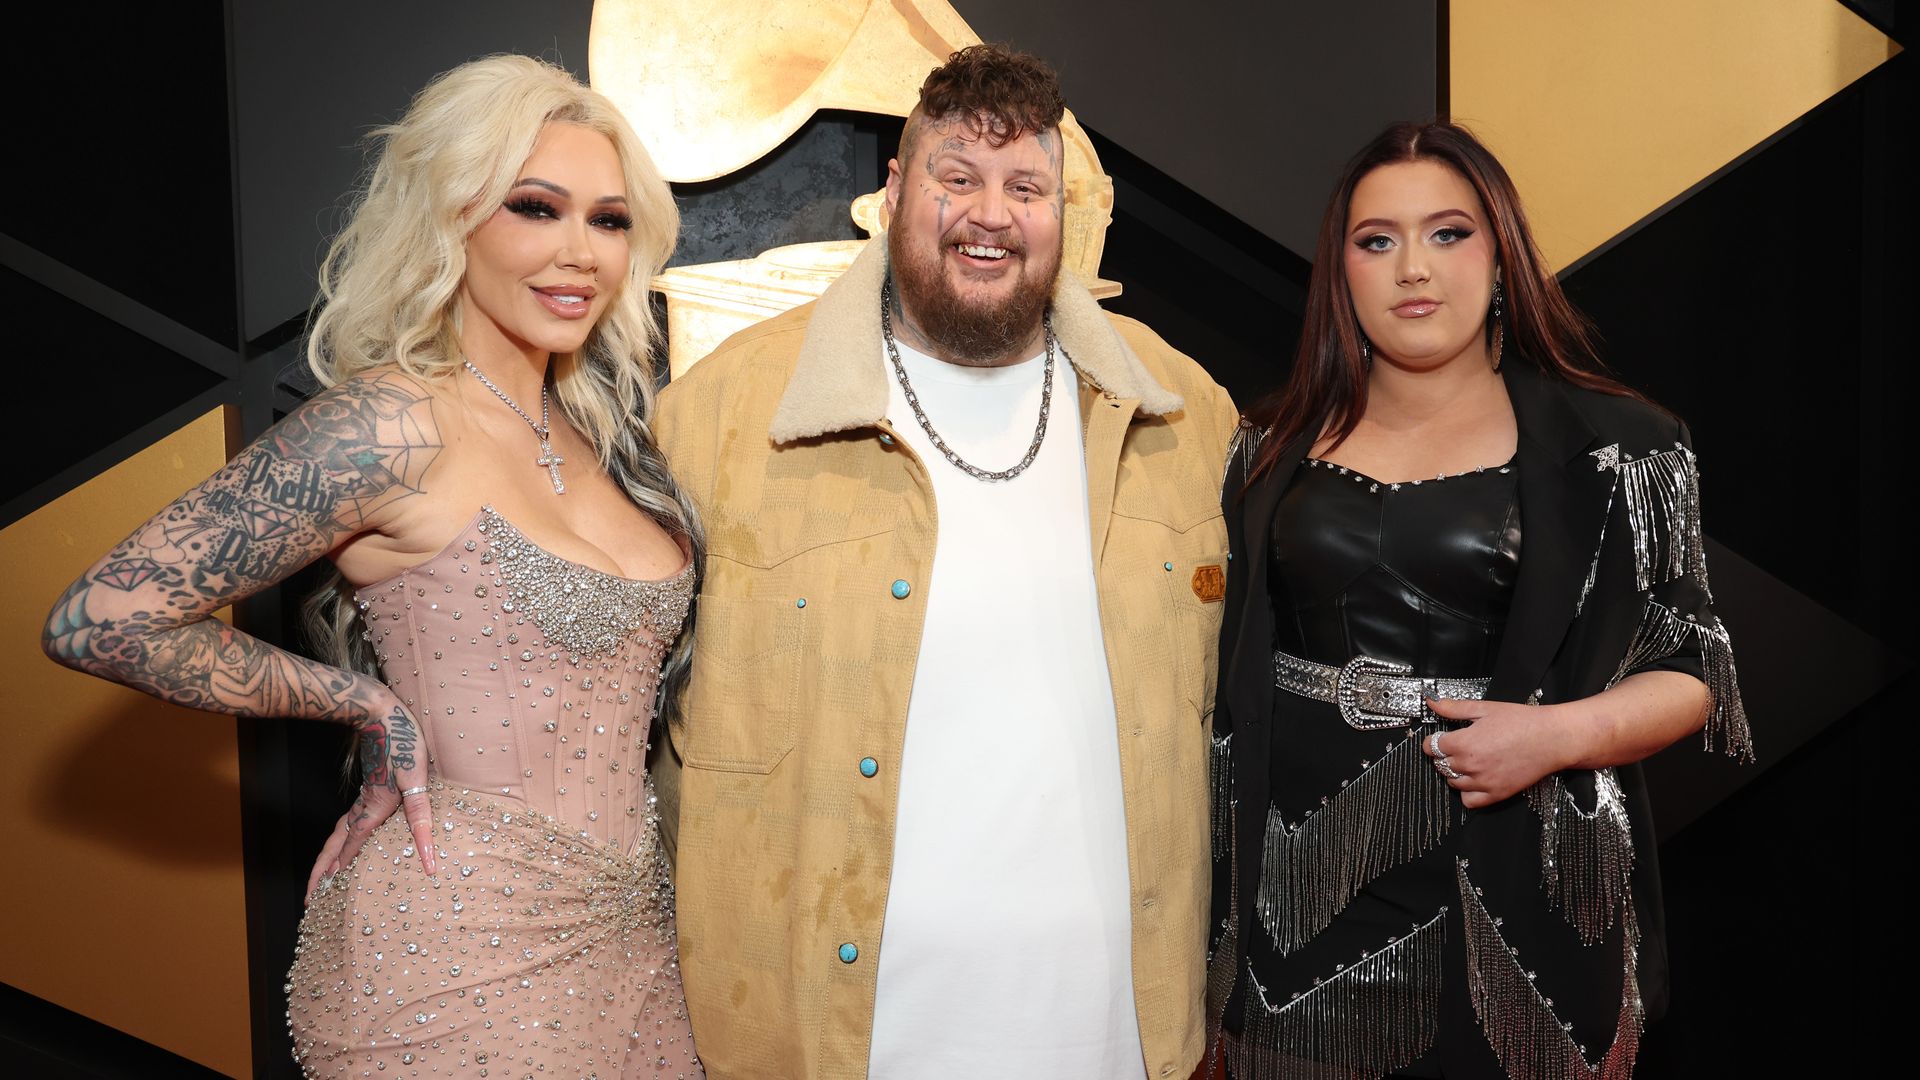 LOS ANGELES, CALIFORNIA - FEBRUARY 04: (L-R) Bunnie Xo, Jelly Roll and Bailee Ann attend the 66th GRAMMY Awards at Crypto.com Arena on February 04, 2024 in Los Angeles, California. (Photo by Kevin Mazur/Getty Images for The Recording Academy)